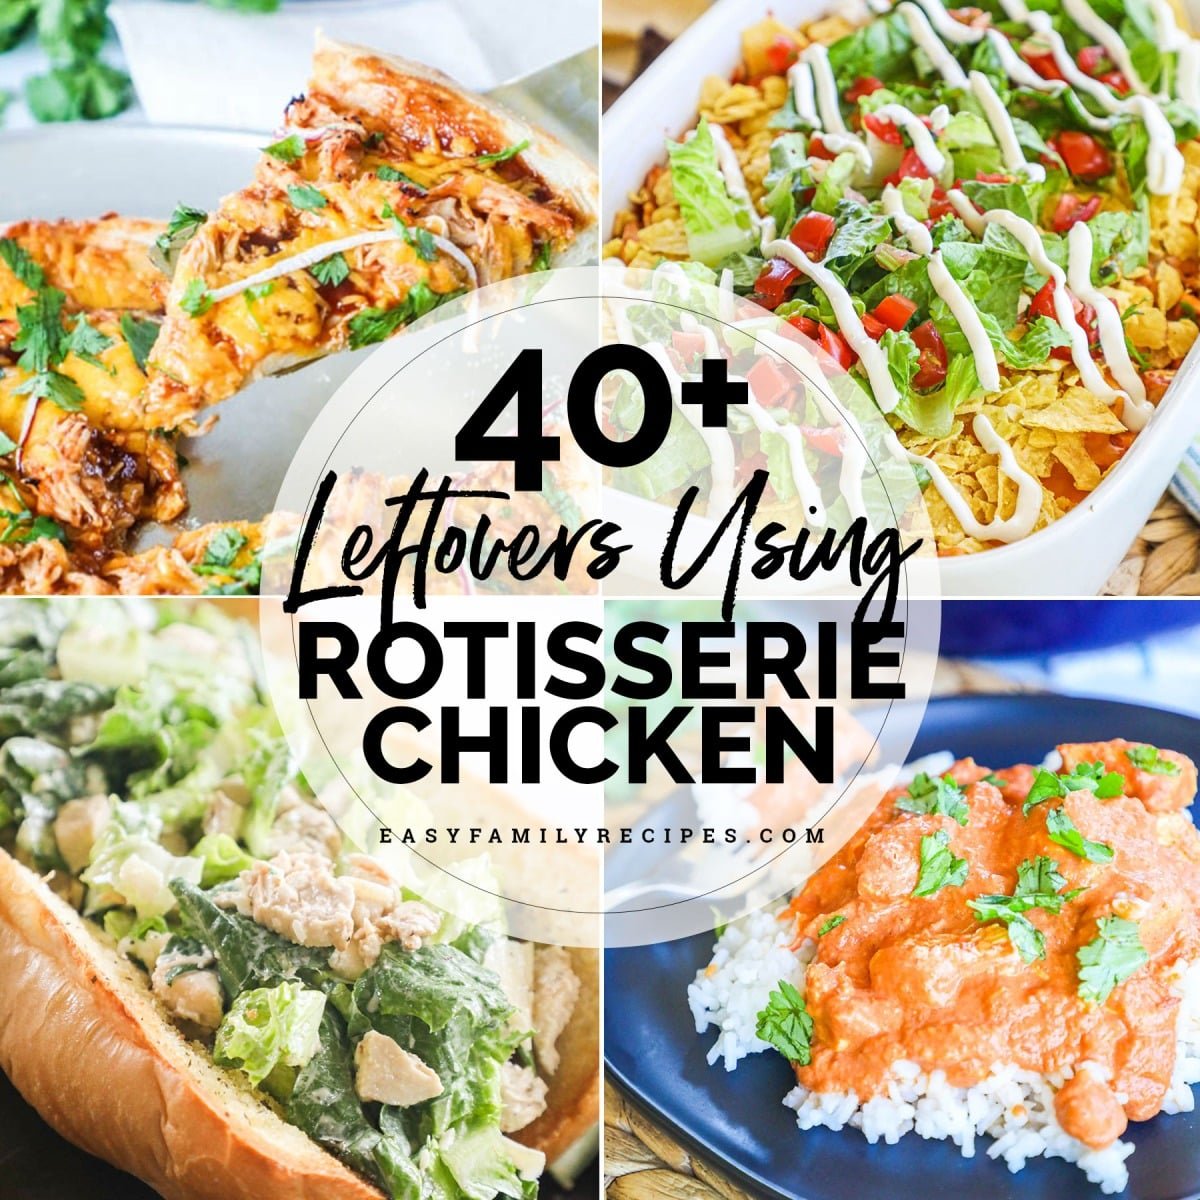 4 images showing recipes you can make with leftover rotisserie chicken. taco chicken casserole, caesar salad sandwiches, butter chicken and bbq chicken pizza